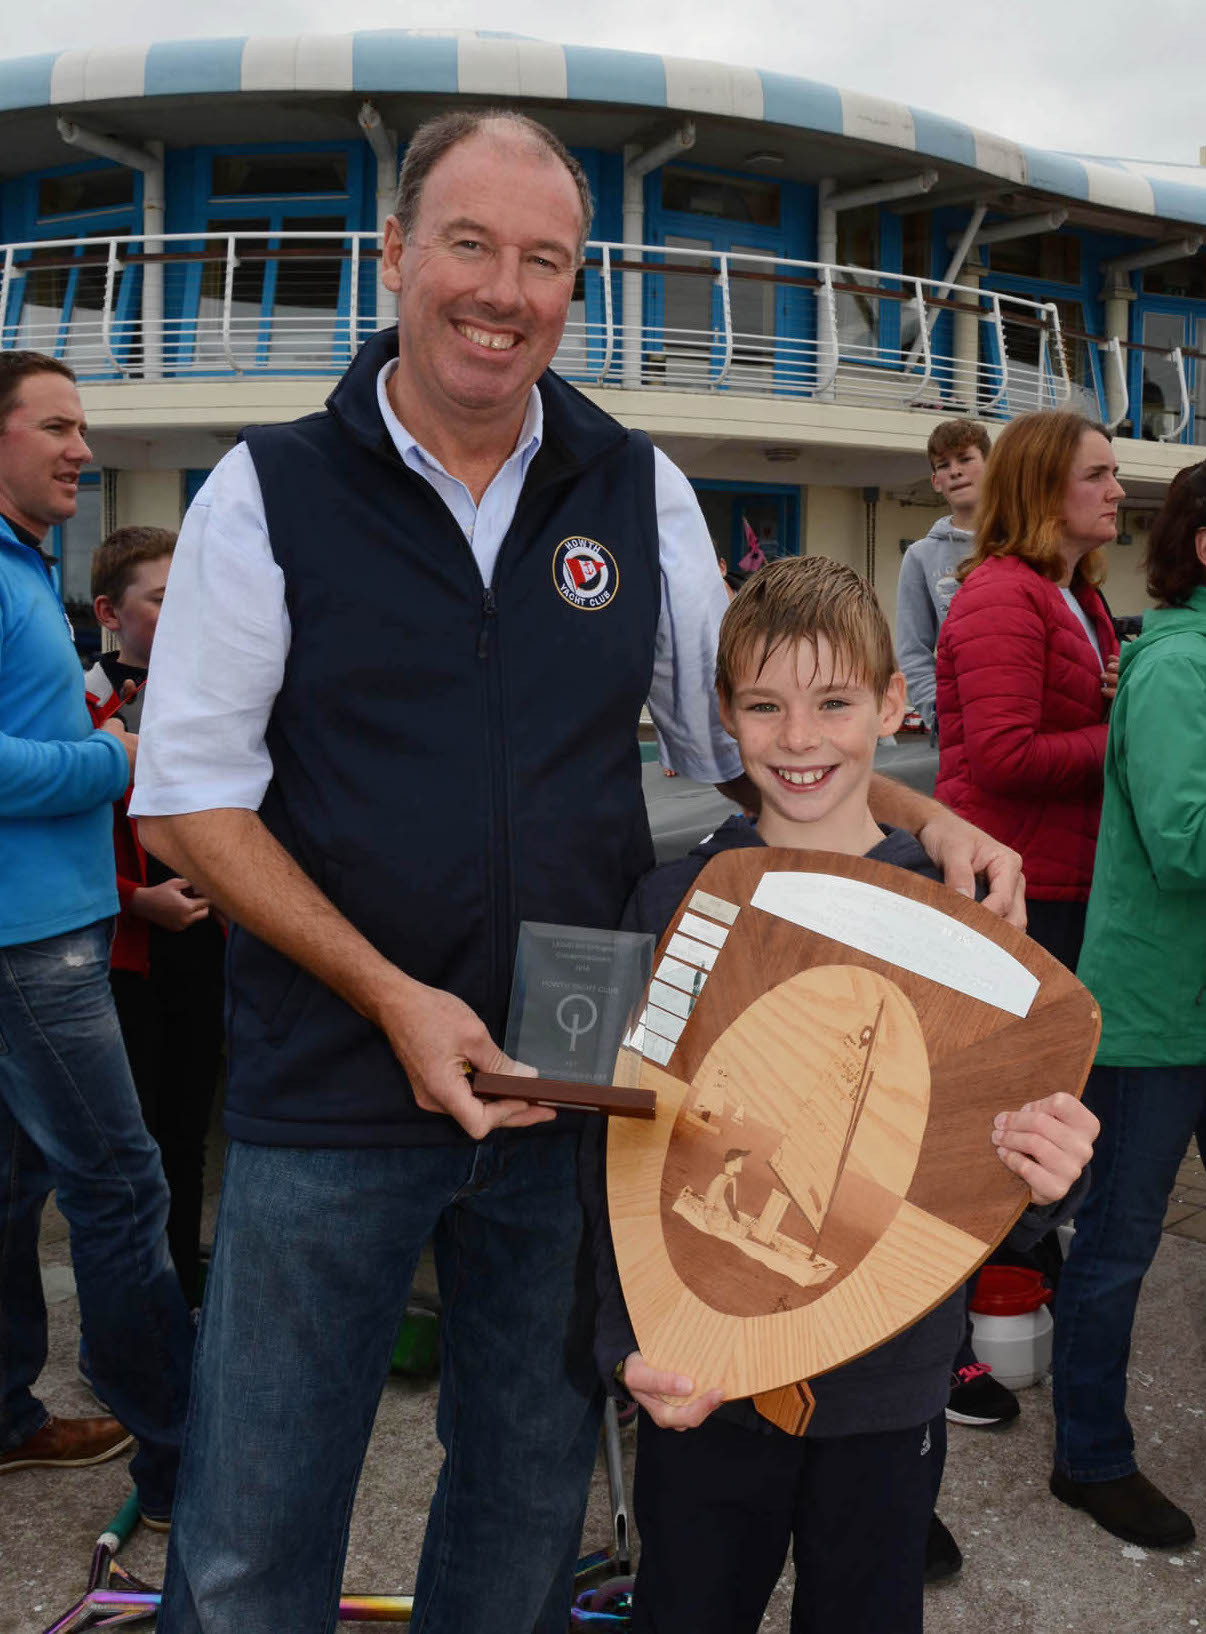 Luke Turvey with the trophy for 1st in Junior Silver Fleet